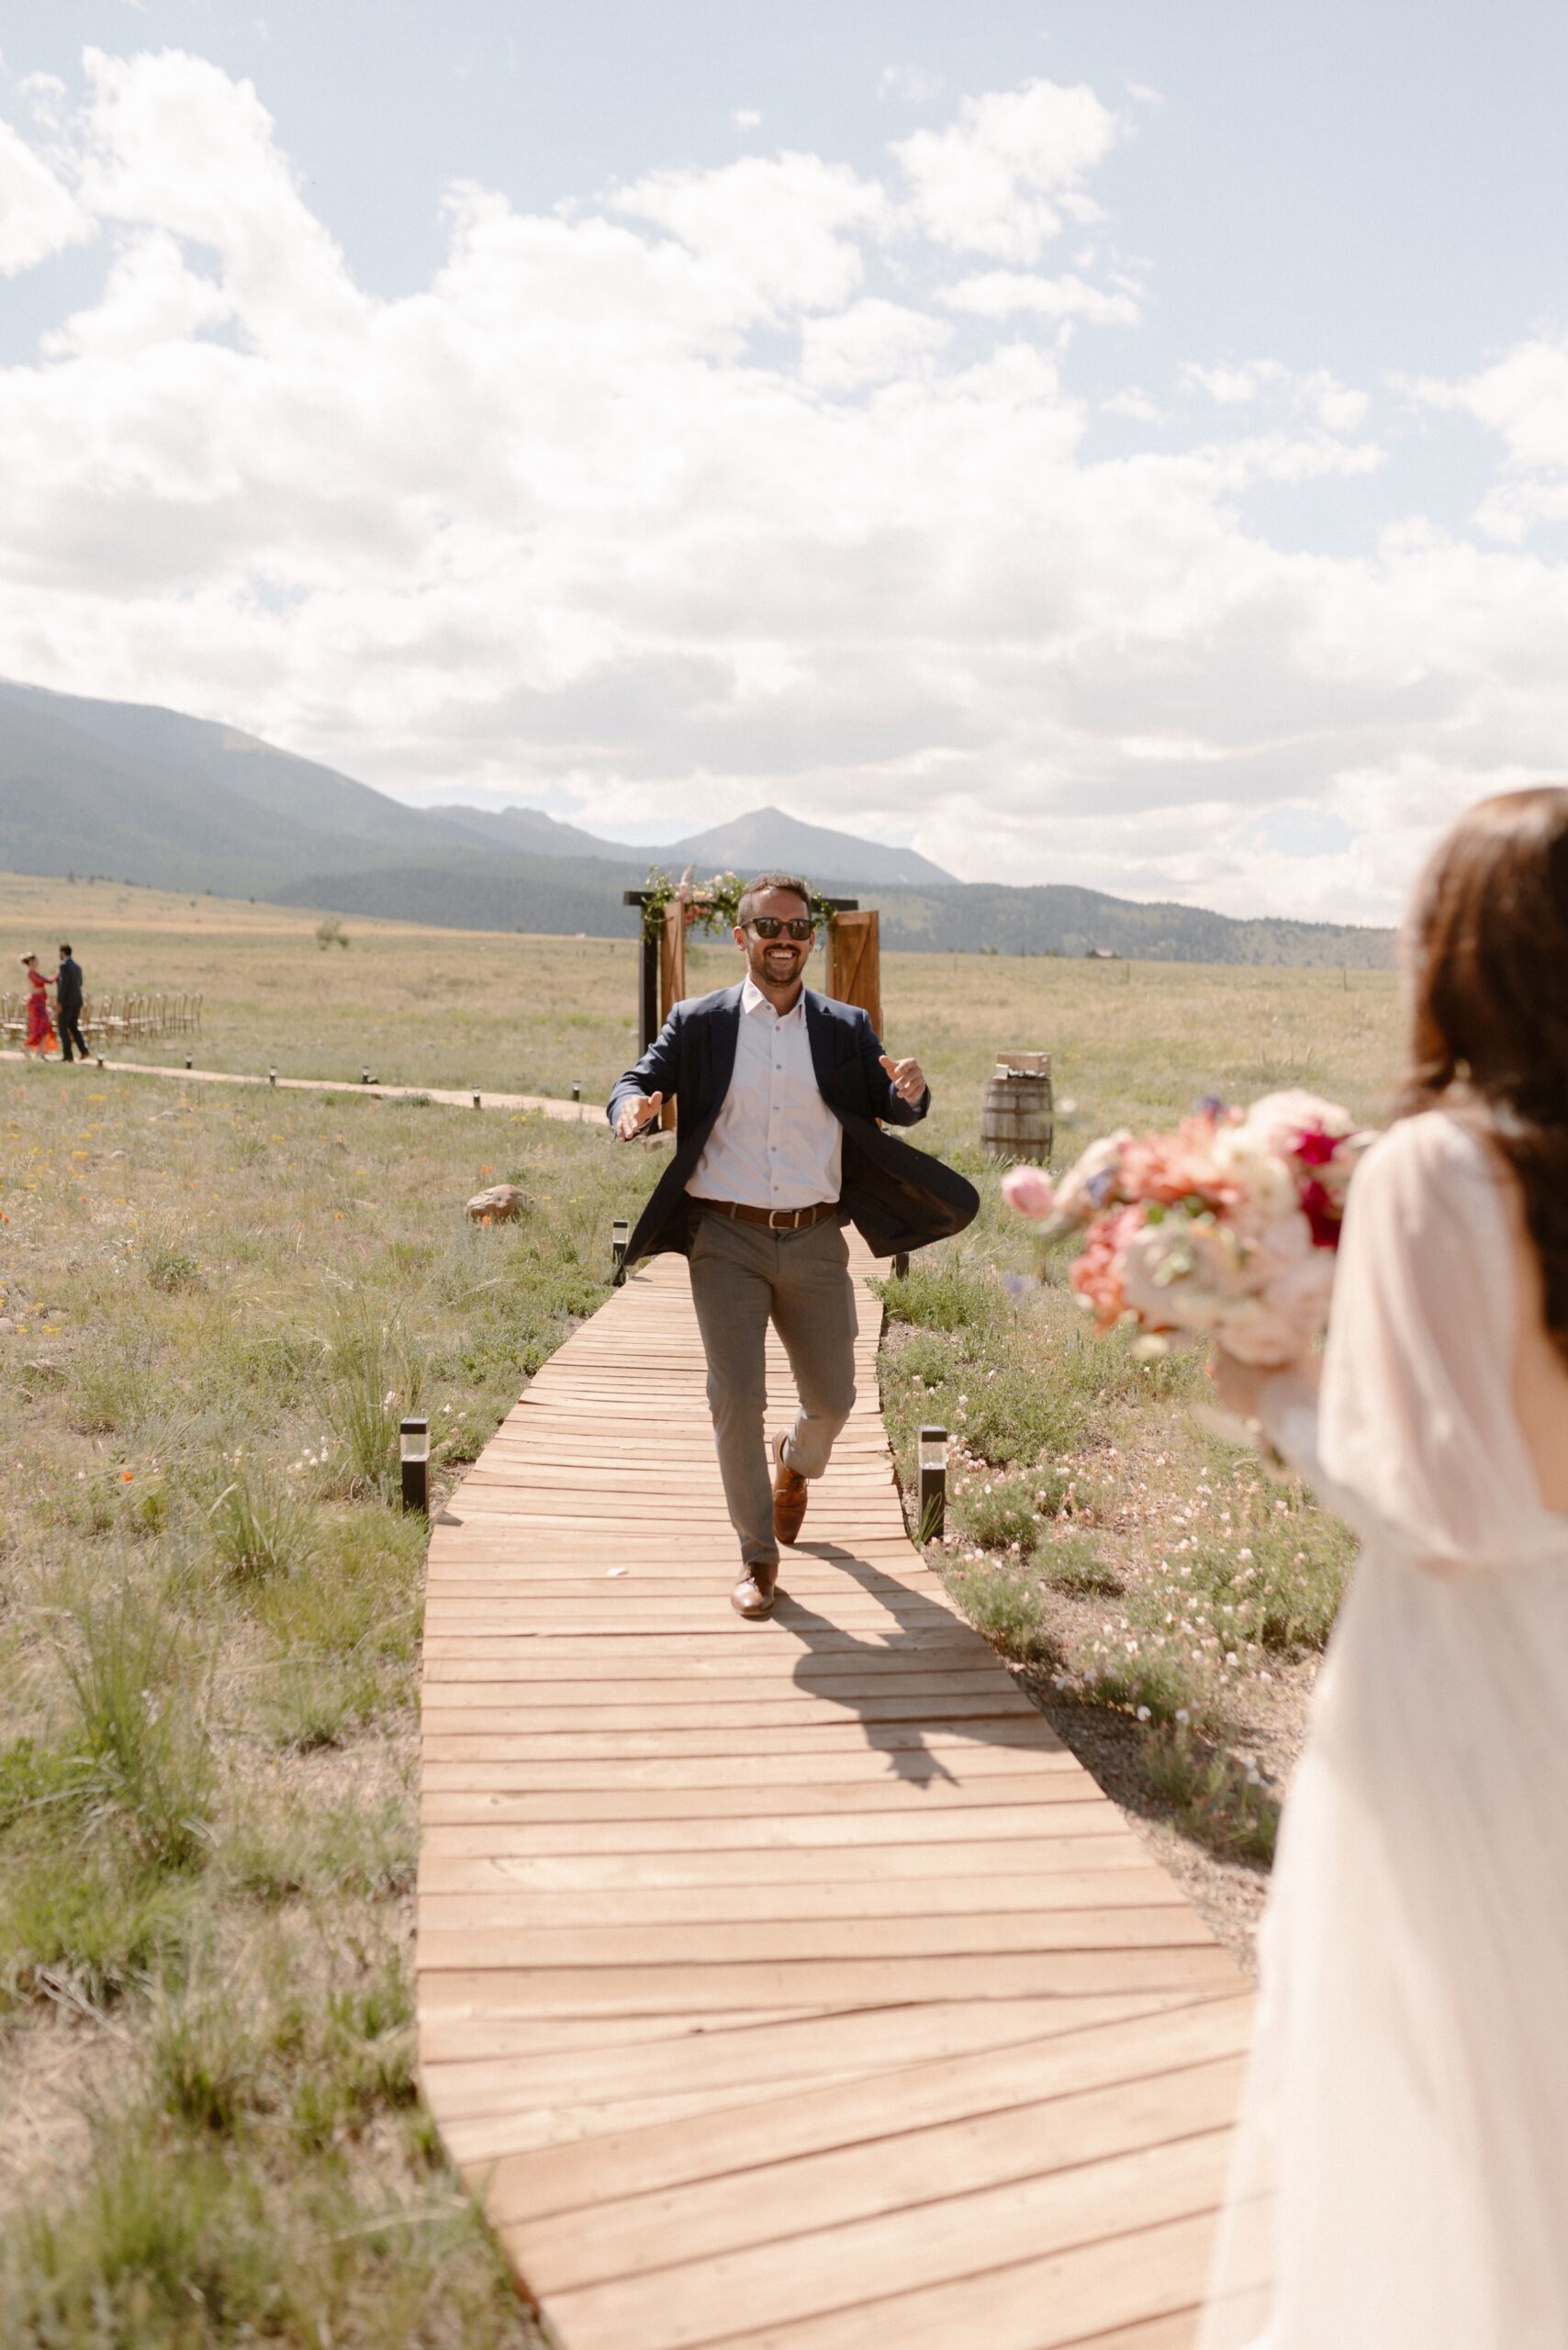 A wedding guests walks with his arms outstretch to the bride. Photo by Colorado wedding photographer Ashley Joyce.